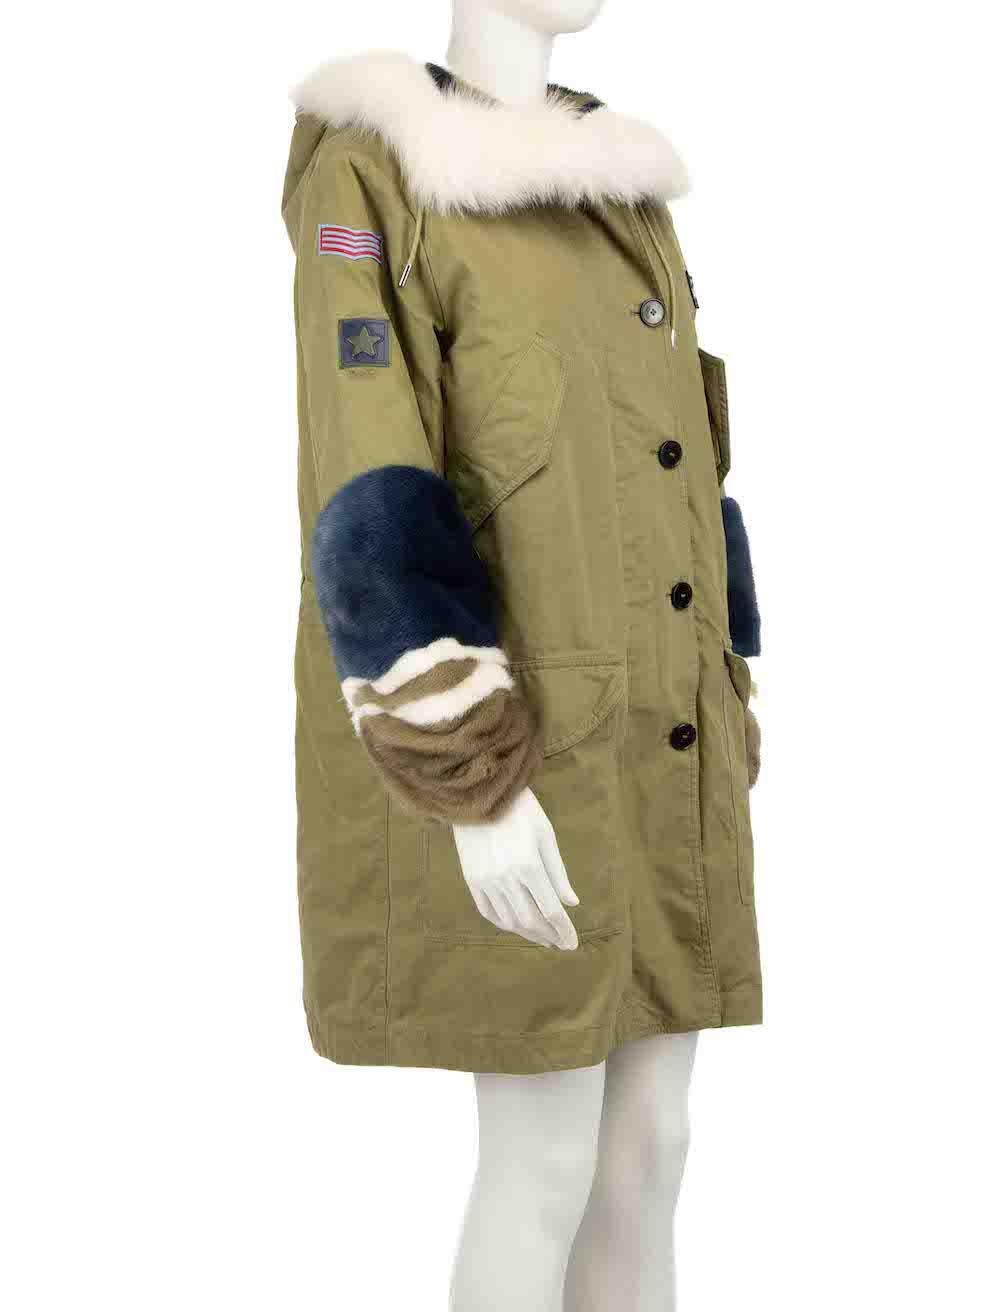 CONDITION is Very good. Minor wear to coat is evident. Light wear to right side chest and left sleeve patches, with a small mark to the right side lower pocket on this used Ermanno Scervino designer resale item.
 
Details
Khaki
Cotton
Parka coat
Fox